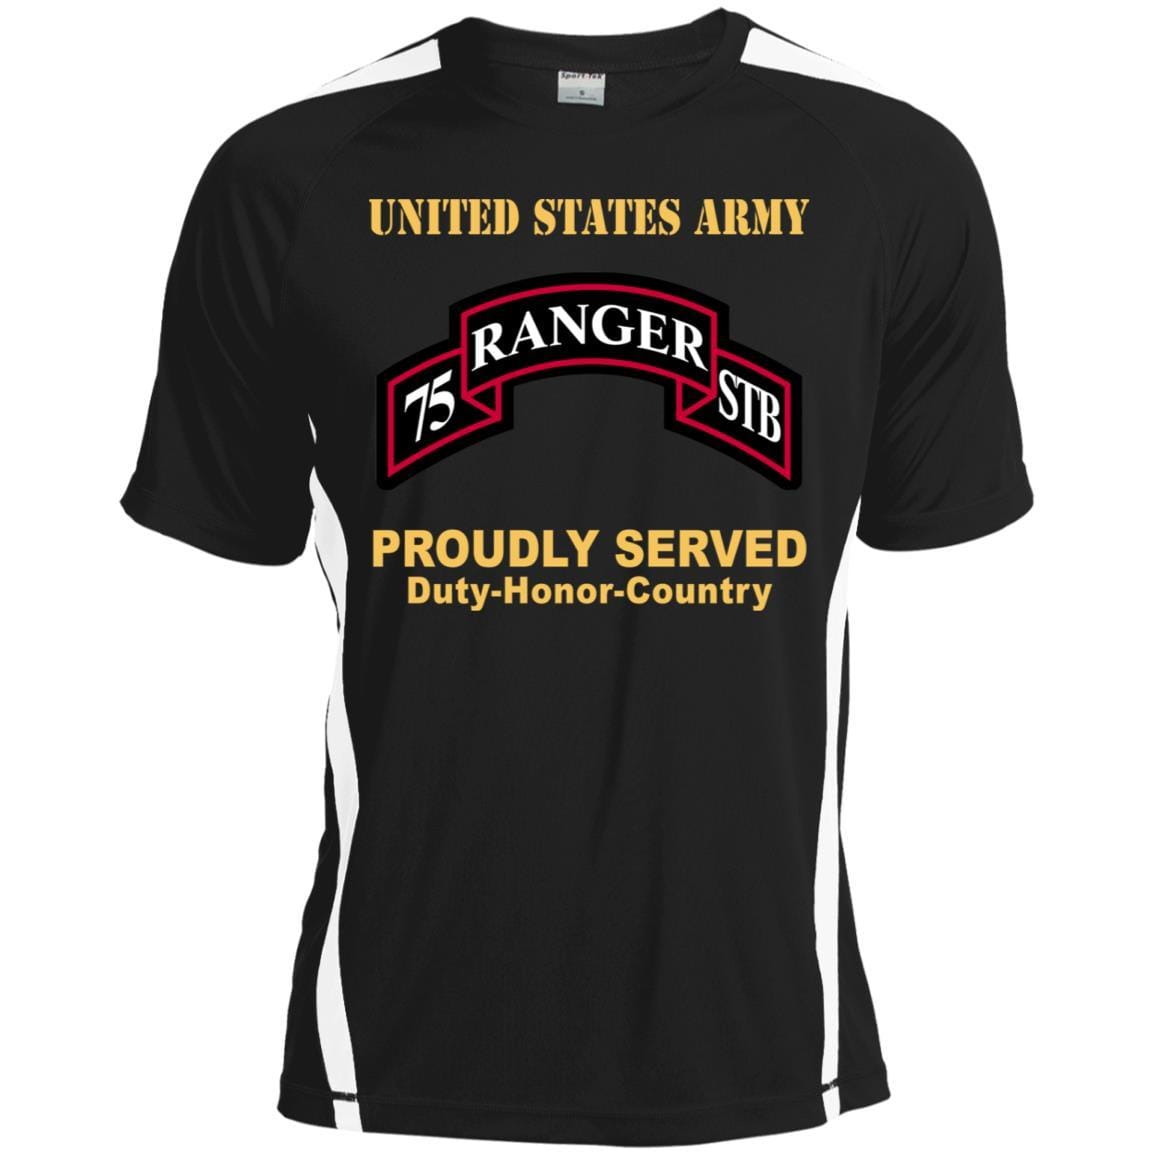 US ARMY 75TH RANGER REGIMENT SPECIALITY TROOPS BATTALION - Proudly Served T-Shirt On Front For Men-TShirt-Army-Veterans Nation